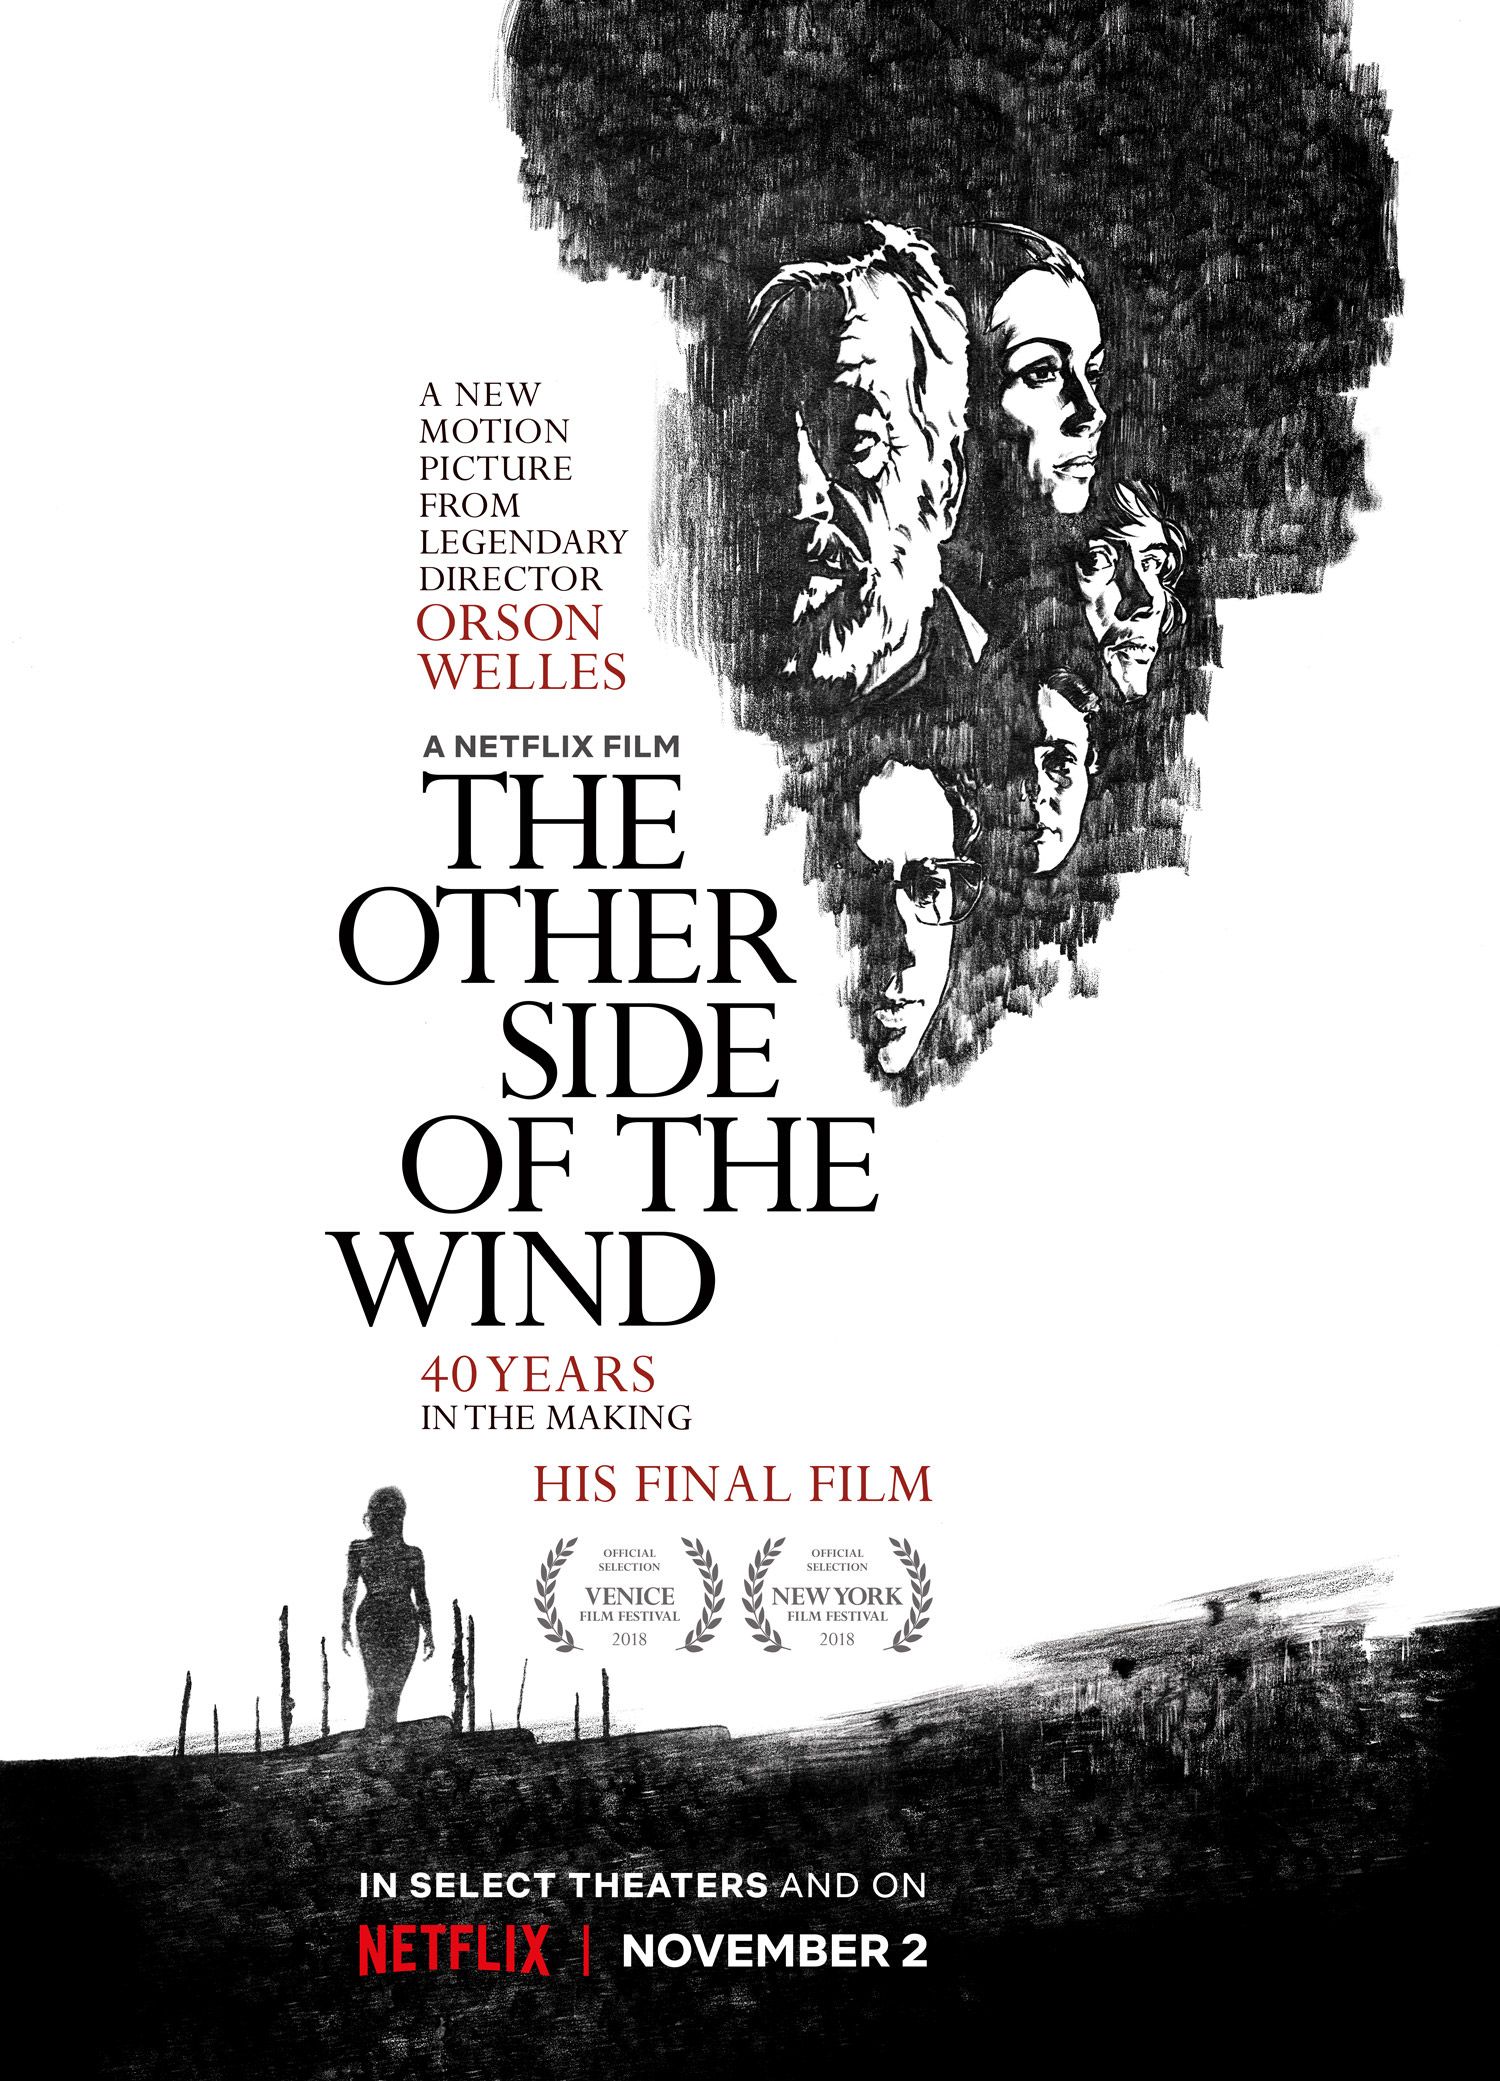 Other Side of the Wind Trailer & Poster Preview Orson Welles’ Final film